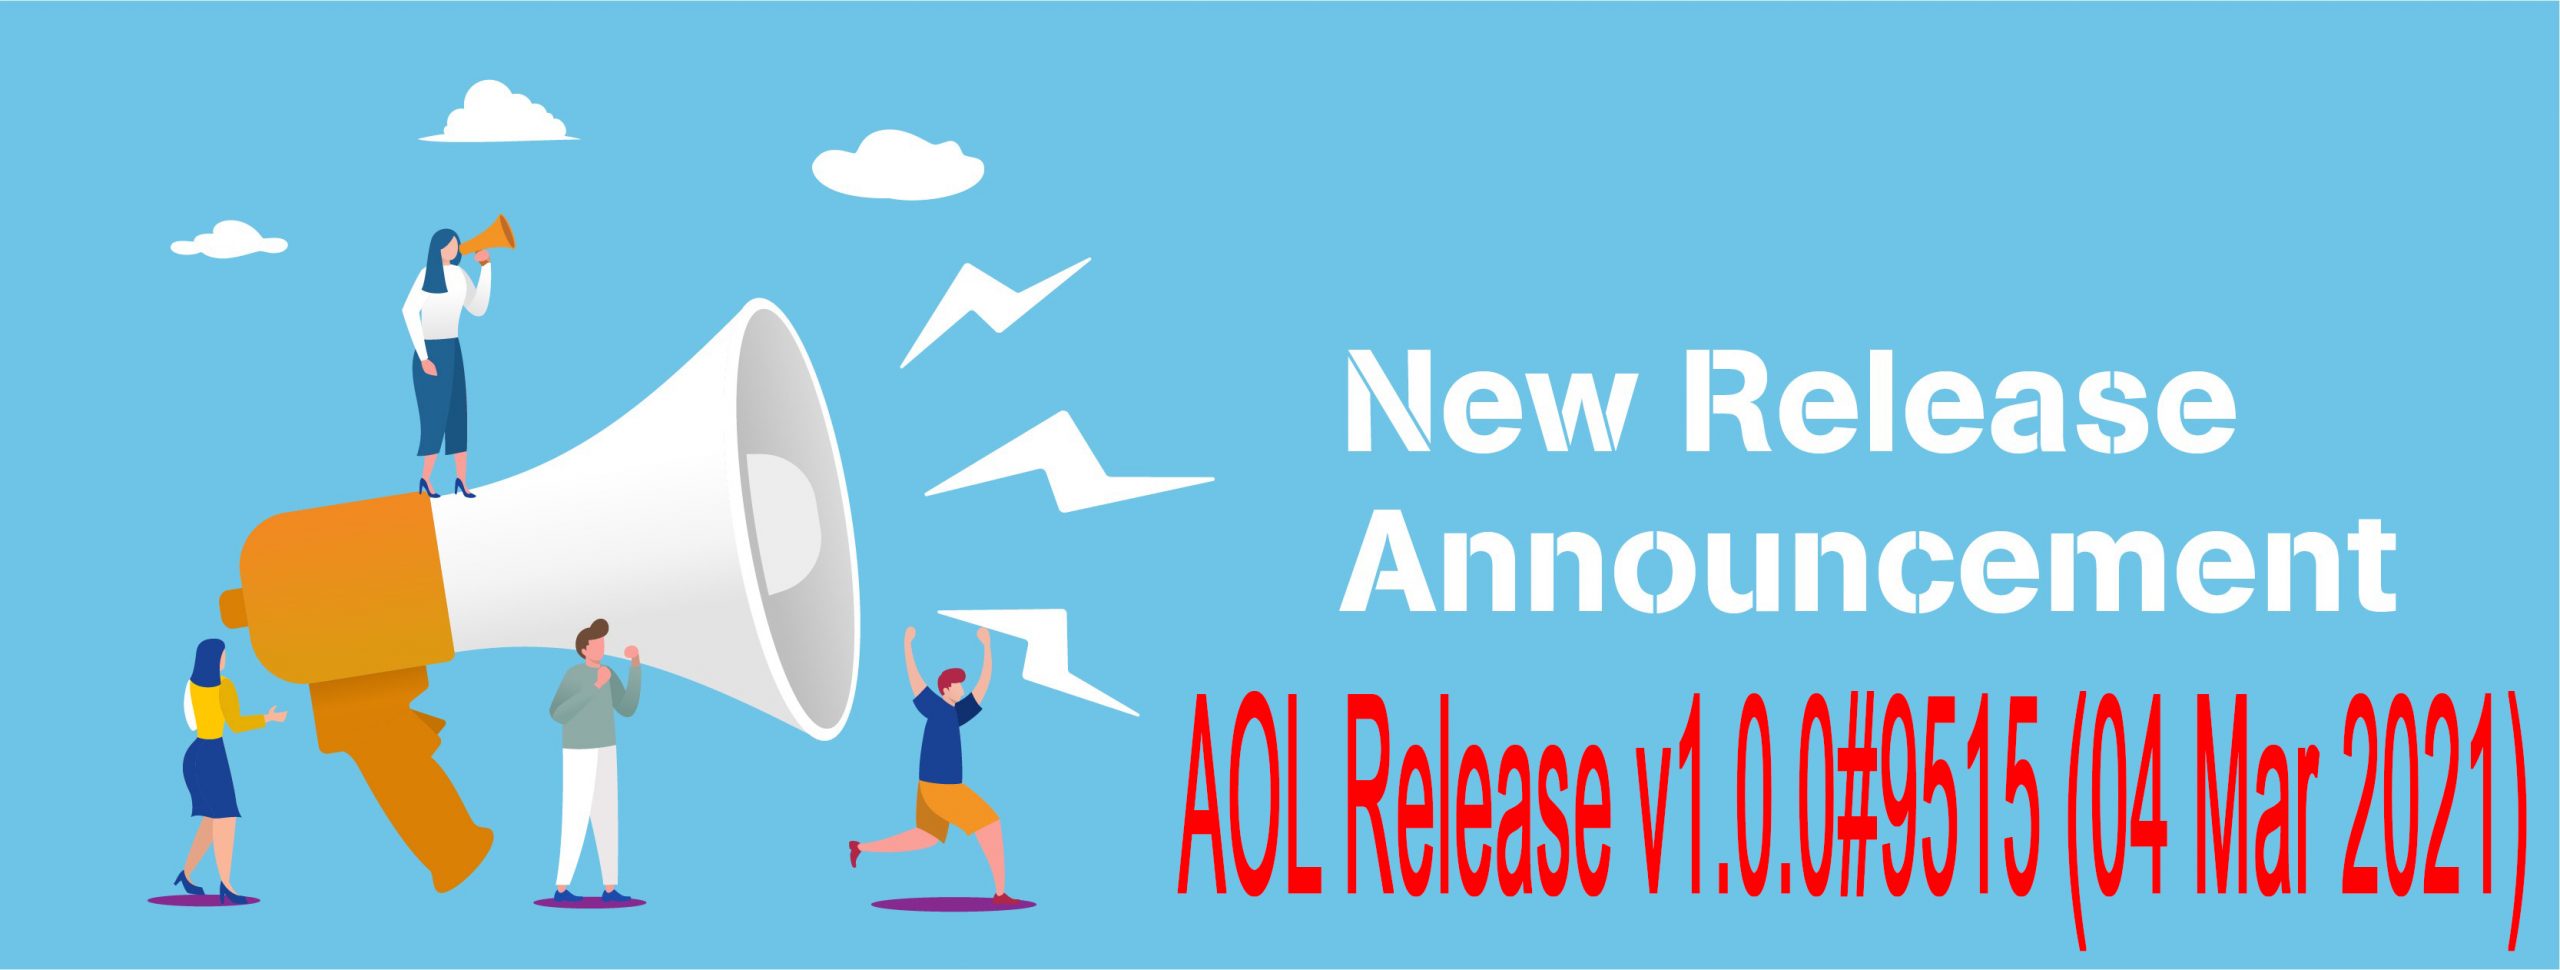 Accurate Online Release v1.0.0#9515 (04 Mar 2021)